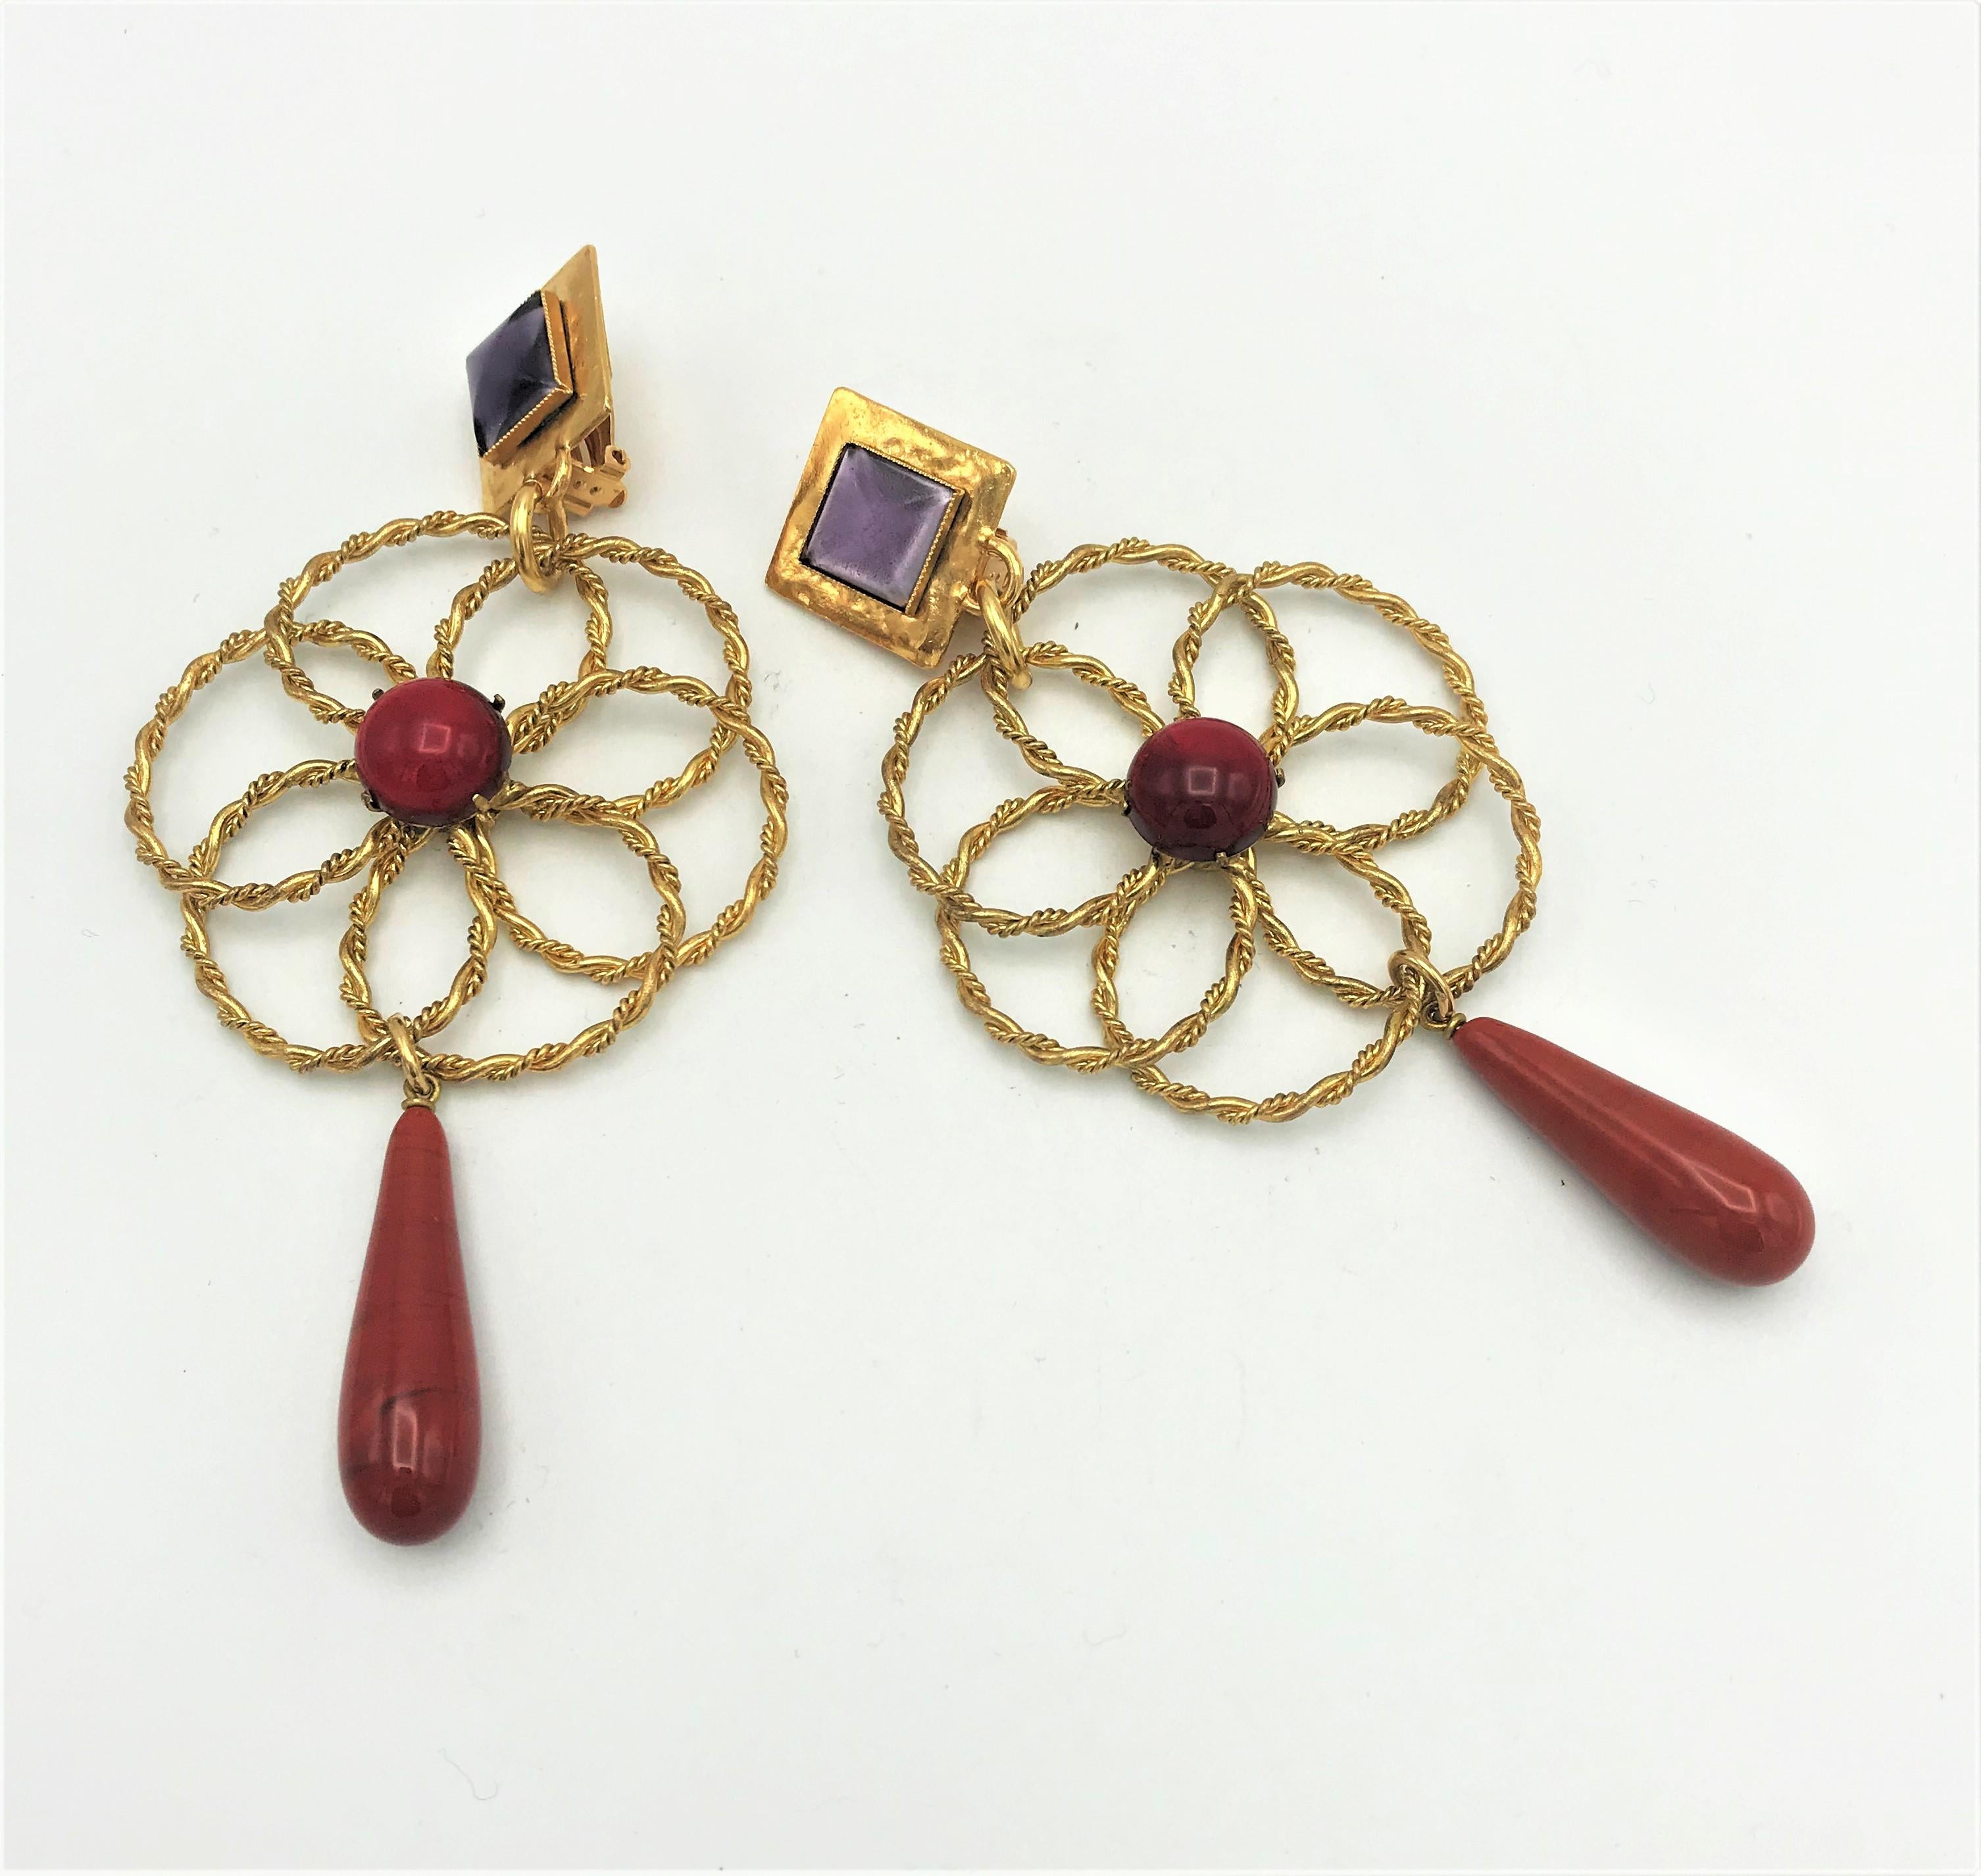 Yves Sant Laurent Clip-on Earrings designed by Roger Scemama Paris for YSL 1980 In Excellent Condition For Sale In Stuttgart, DE